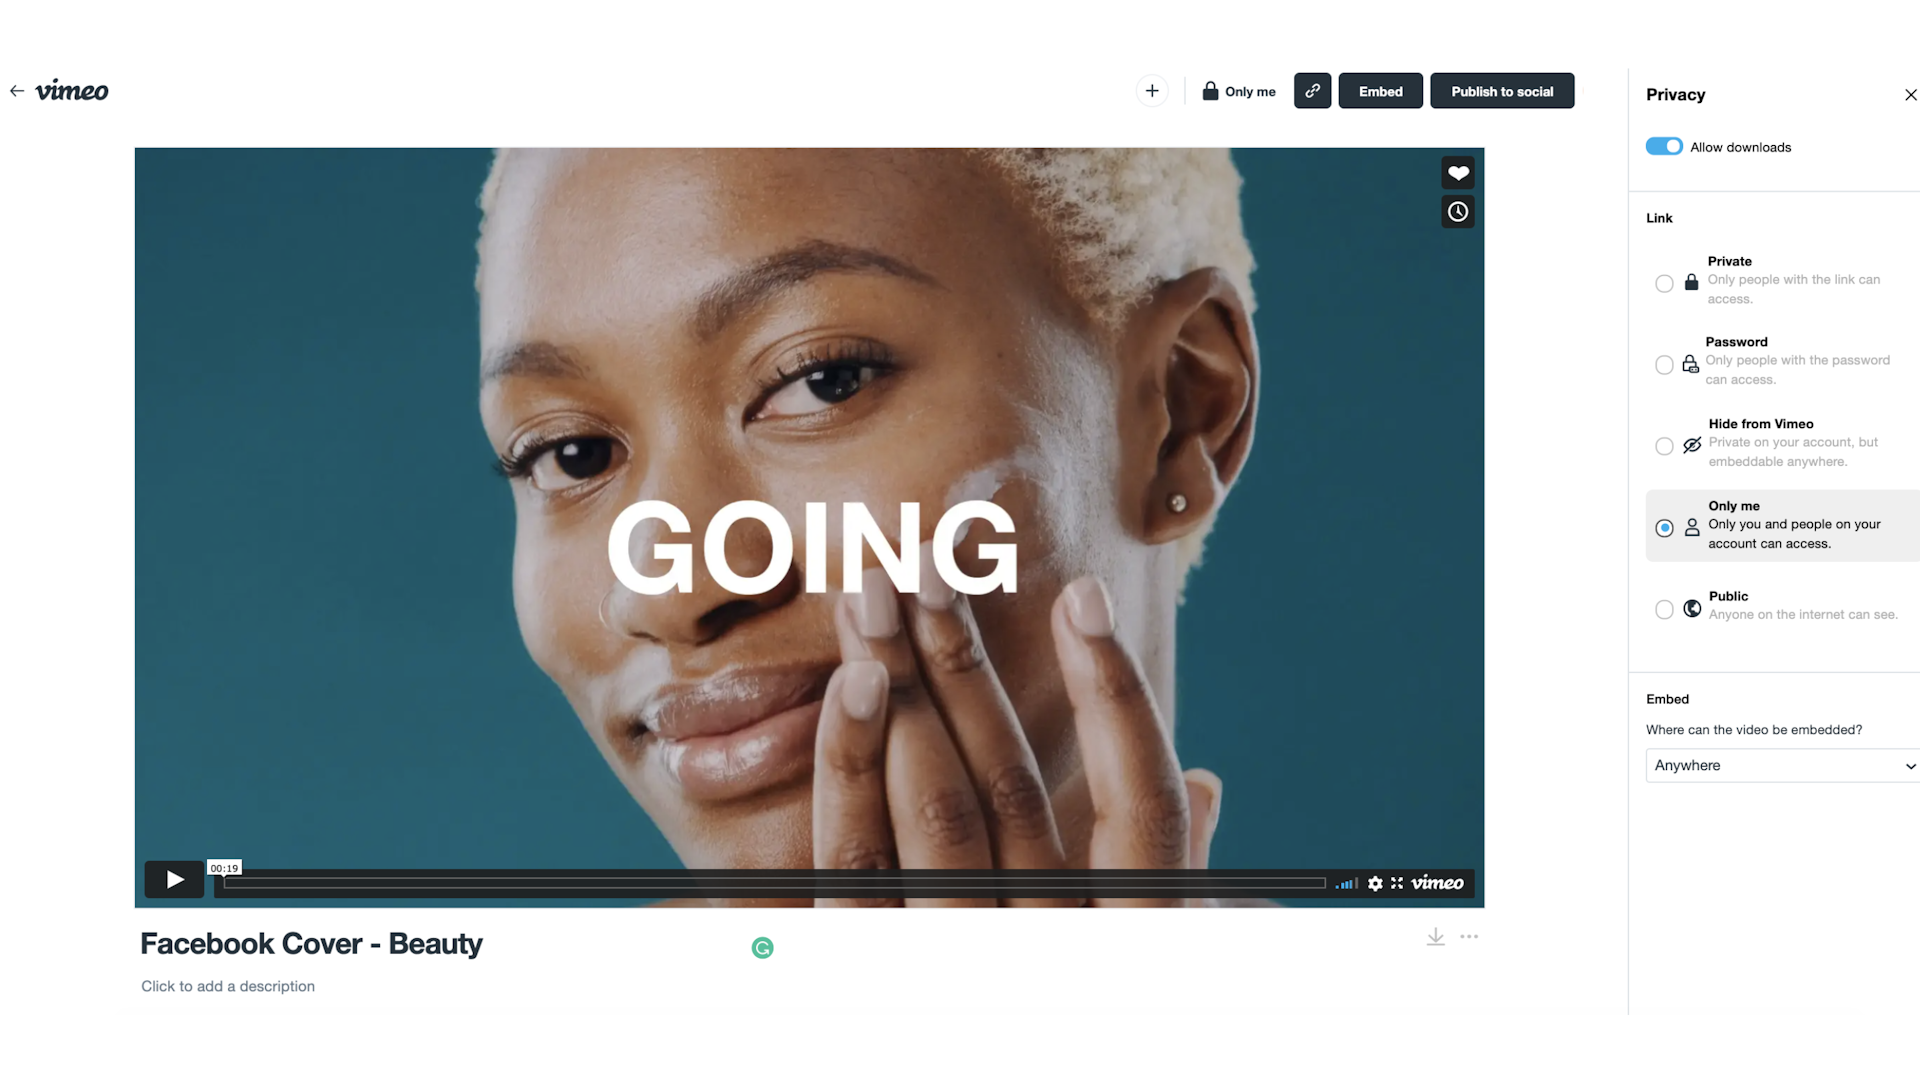 Video privacy, explained (and how to tweak settings in Vimeo) - Vimeo blog